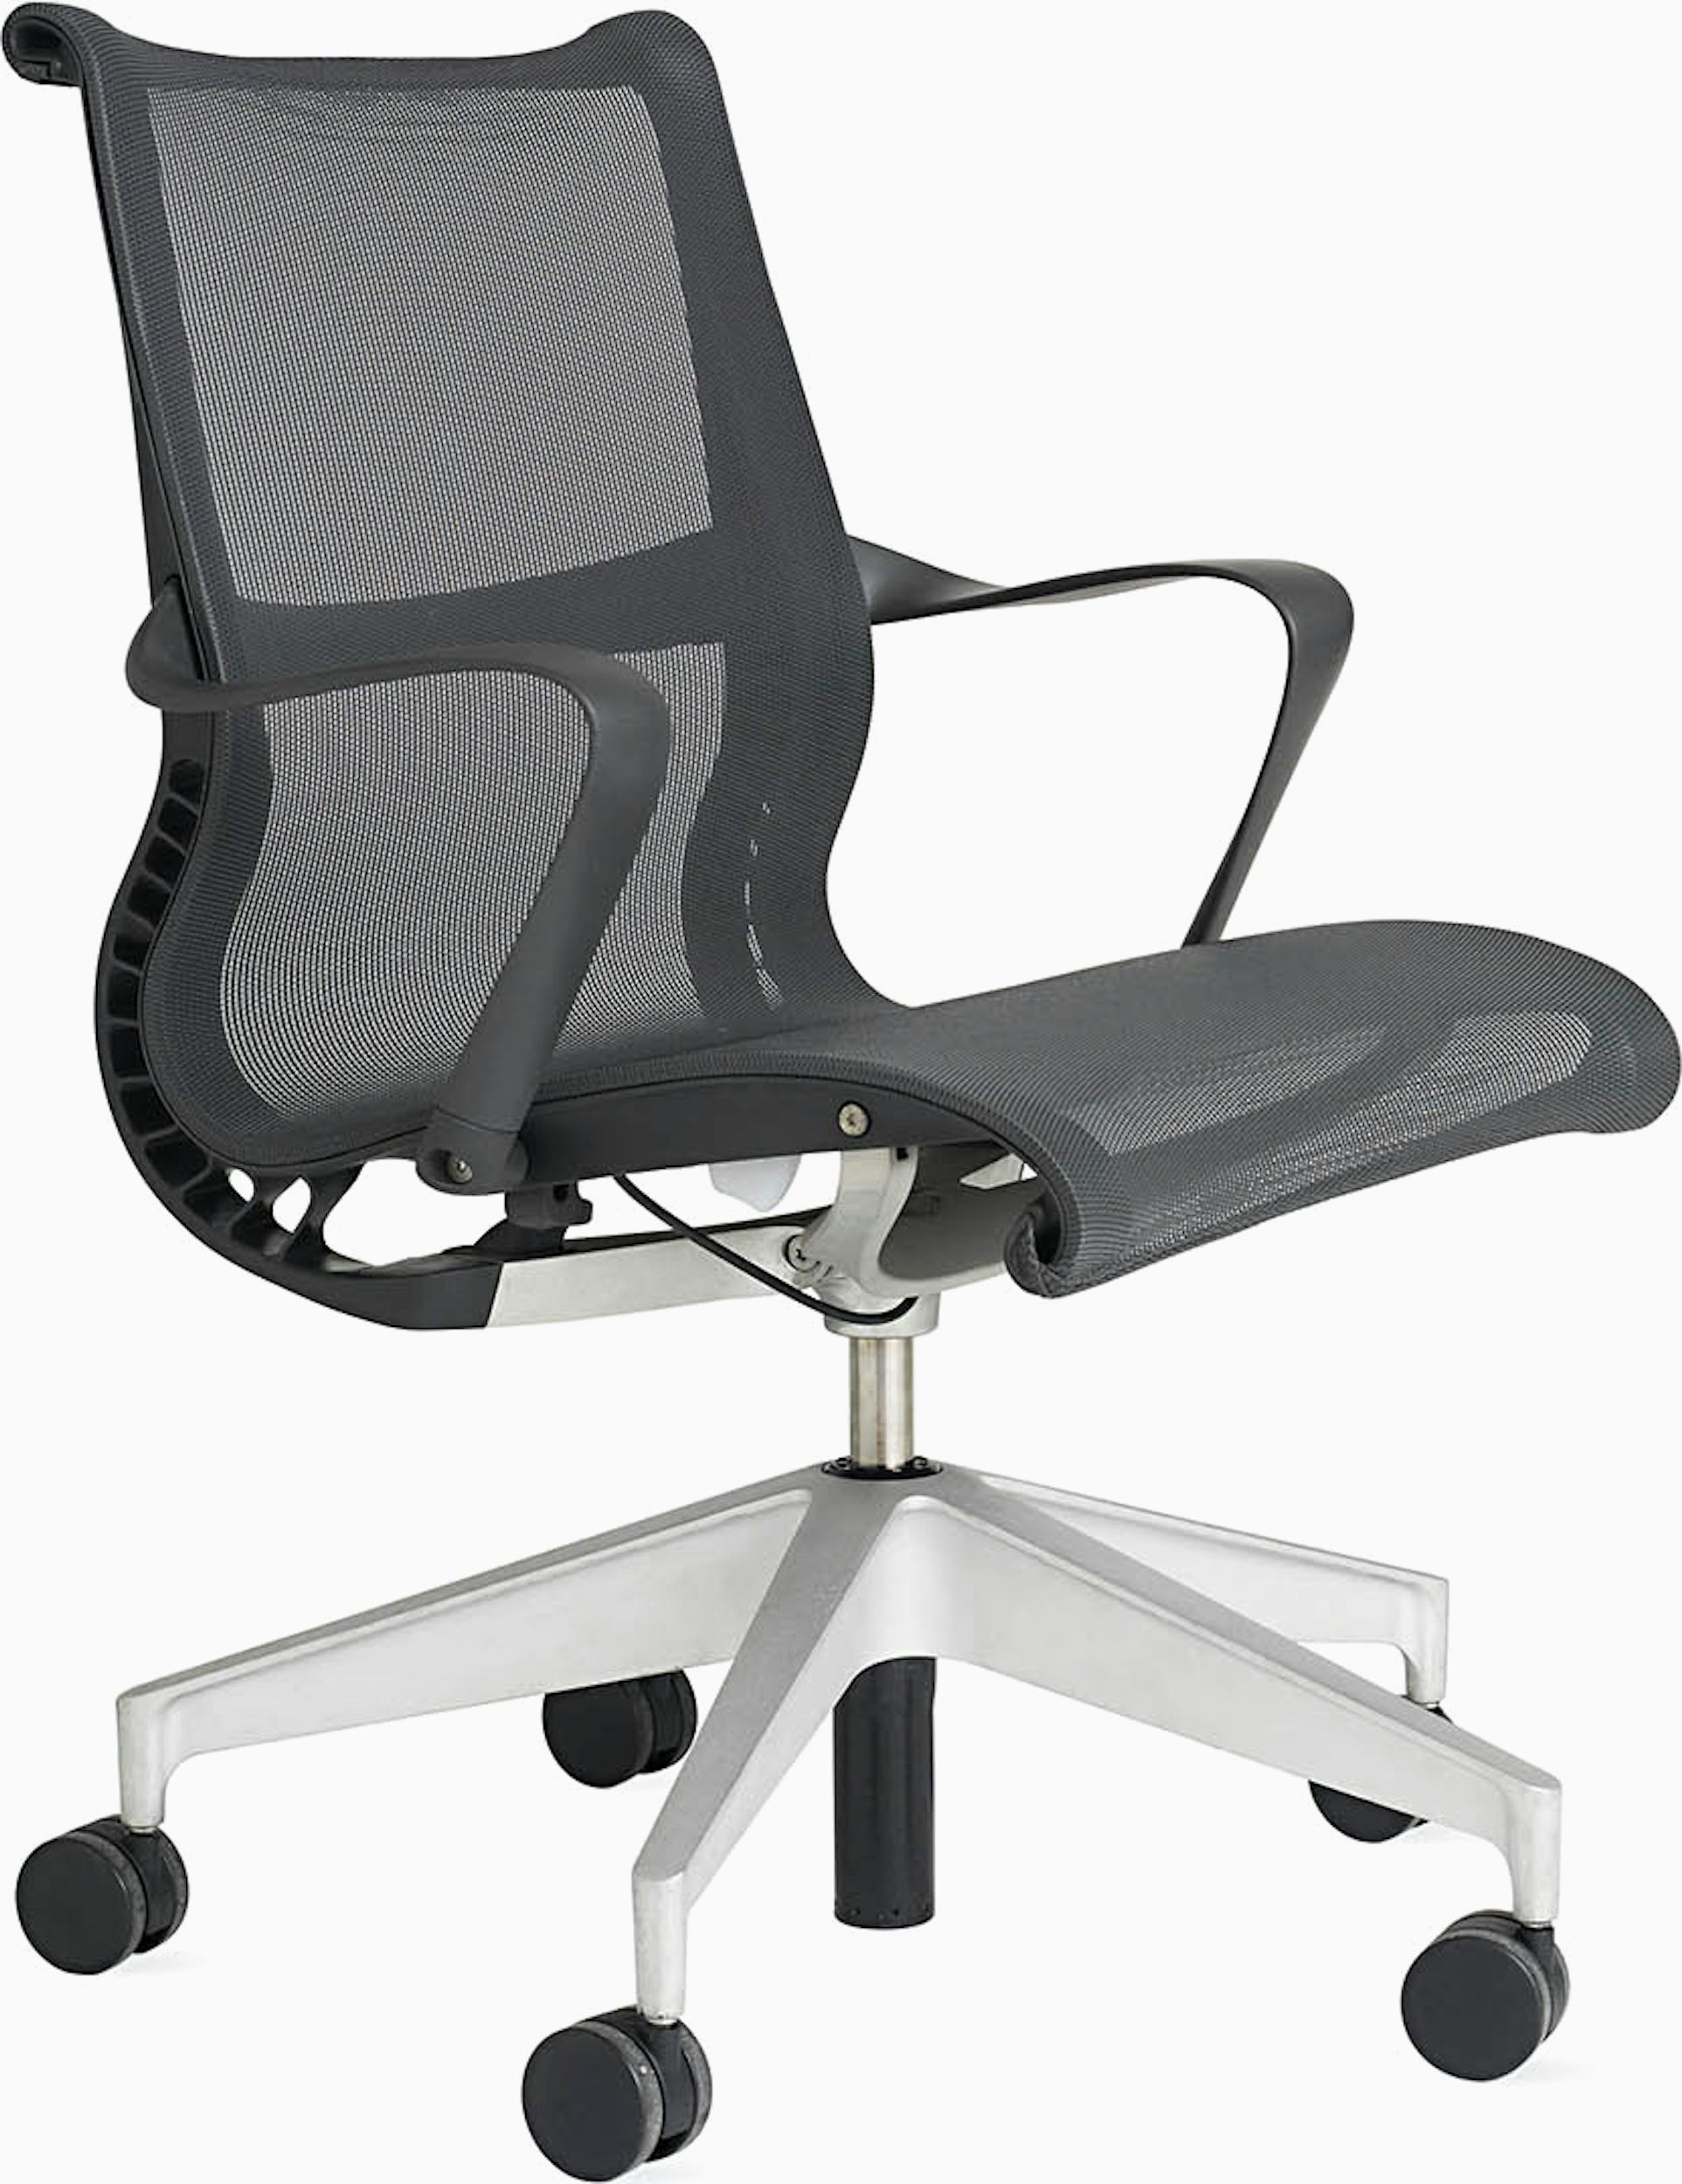 Freedom Chair Accessories and Replacement Parts